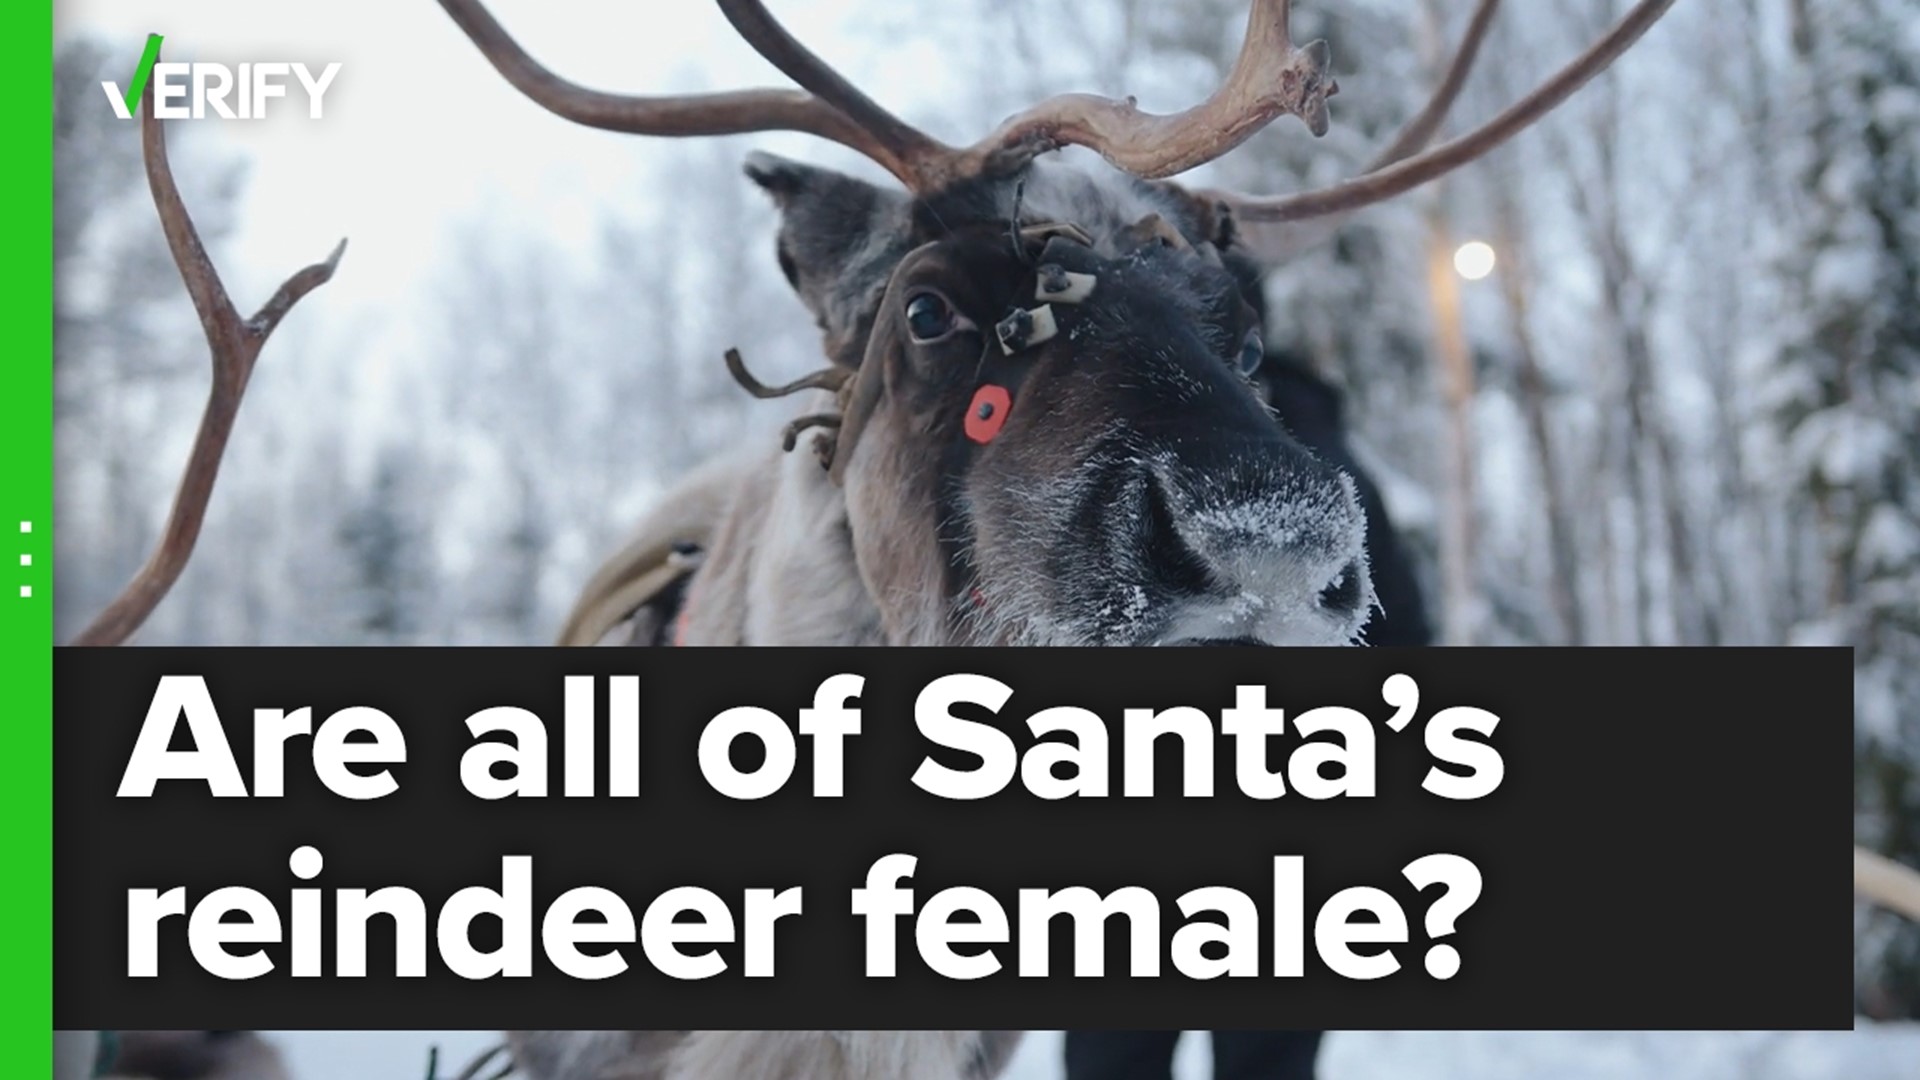 Places to See Santa's Reindeer and Other Animals in Ireland